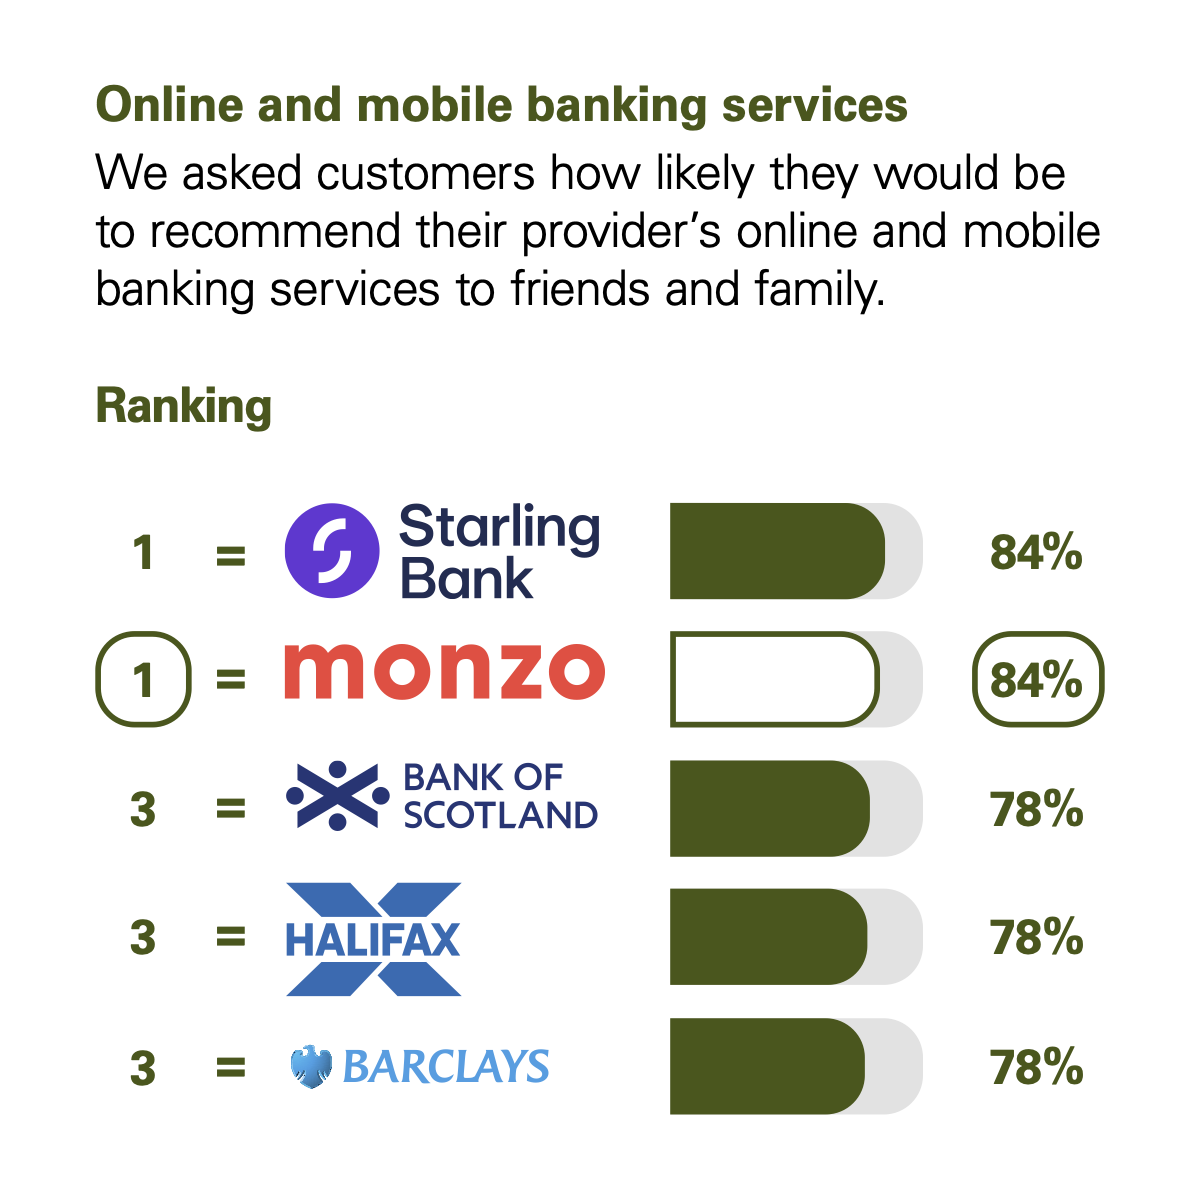 Graph showing the results of the CMA scoring of UK banks in the Online and Mobile Banking Services category. The CMA asked customers how likely they would be to recommend their provider's online and mobile banking services to friends and family. The rankings with percentage scores are: Joint 1st are Starling Bank with 84% and Monzo with 84%. Joint 3rd are Royal Bank of Scotland with 78%, Halifax with 78% and Barclays with 78%.